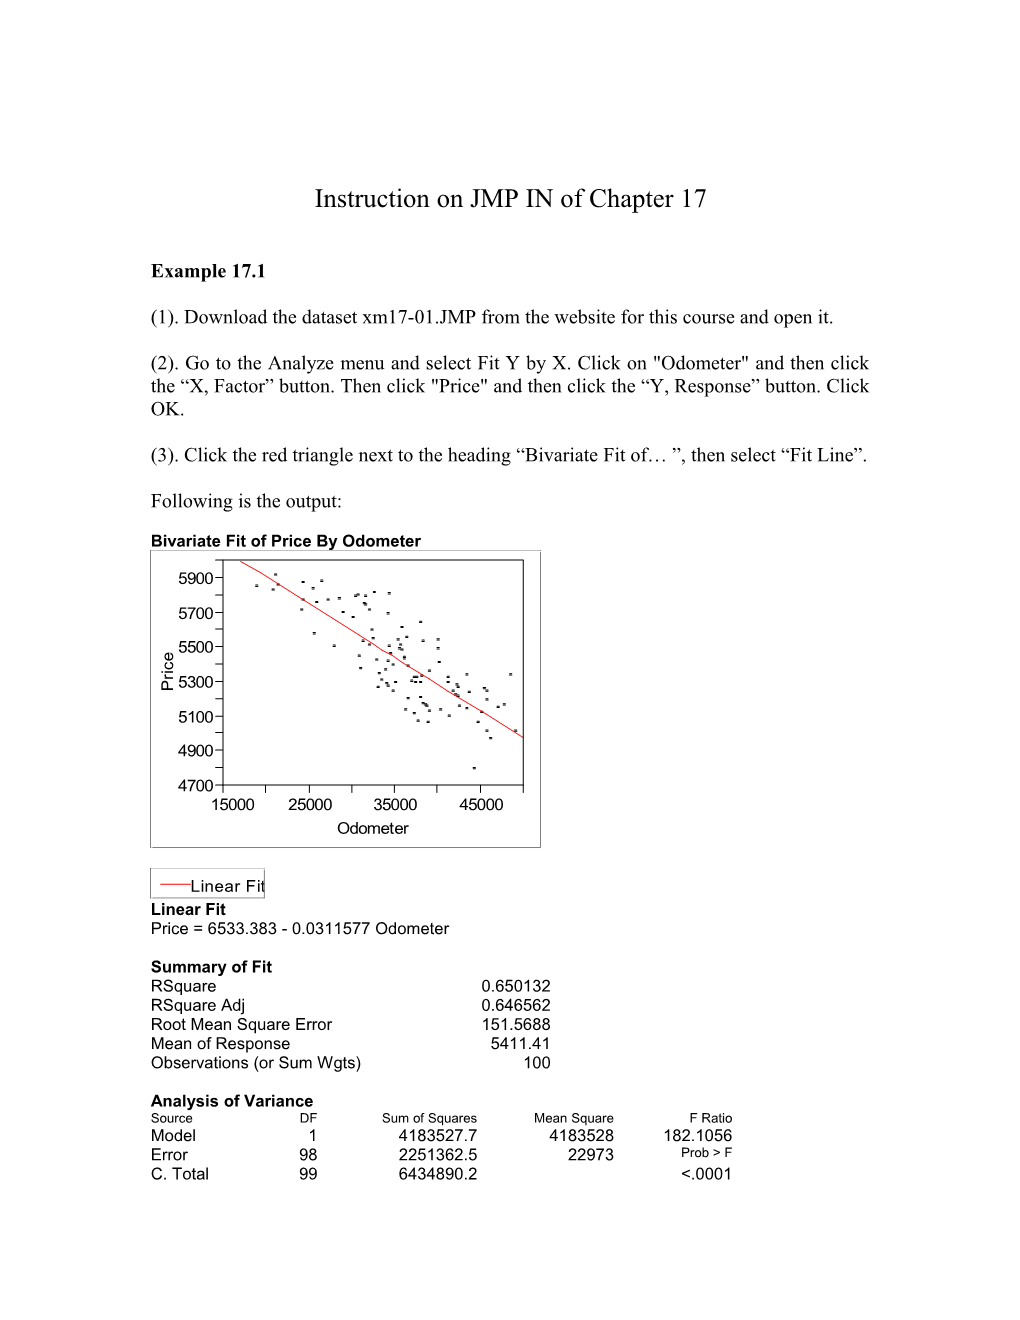 Instruction on JMP in of Chapter 12